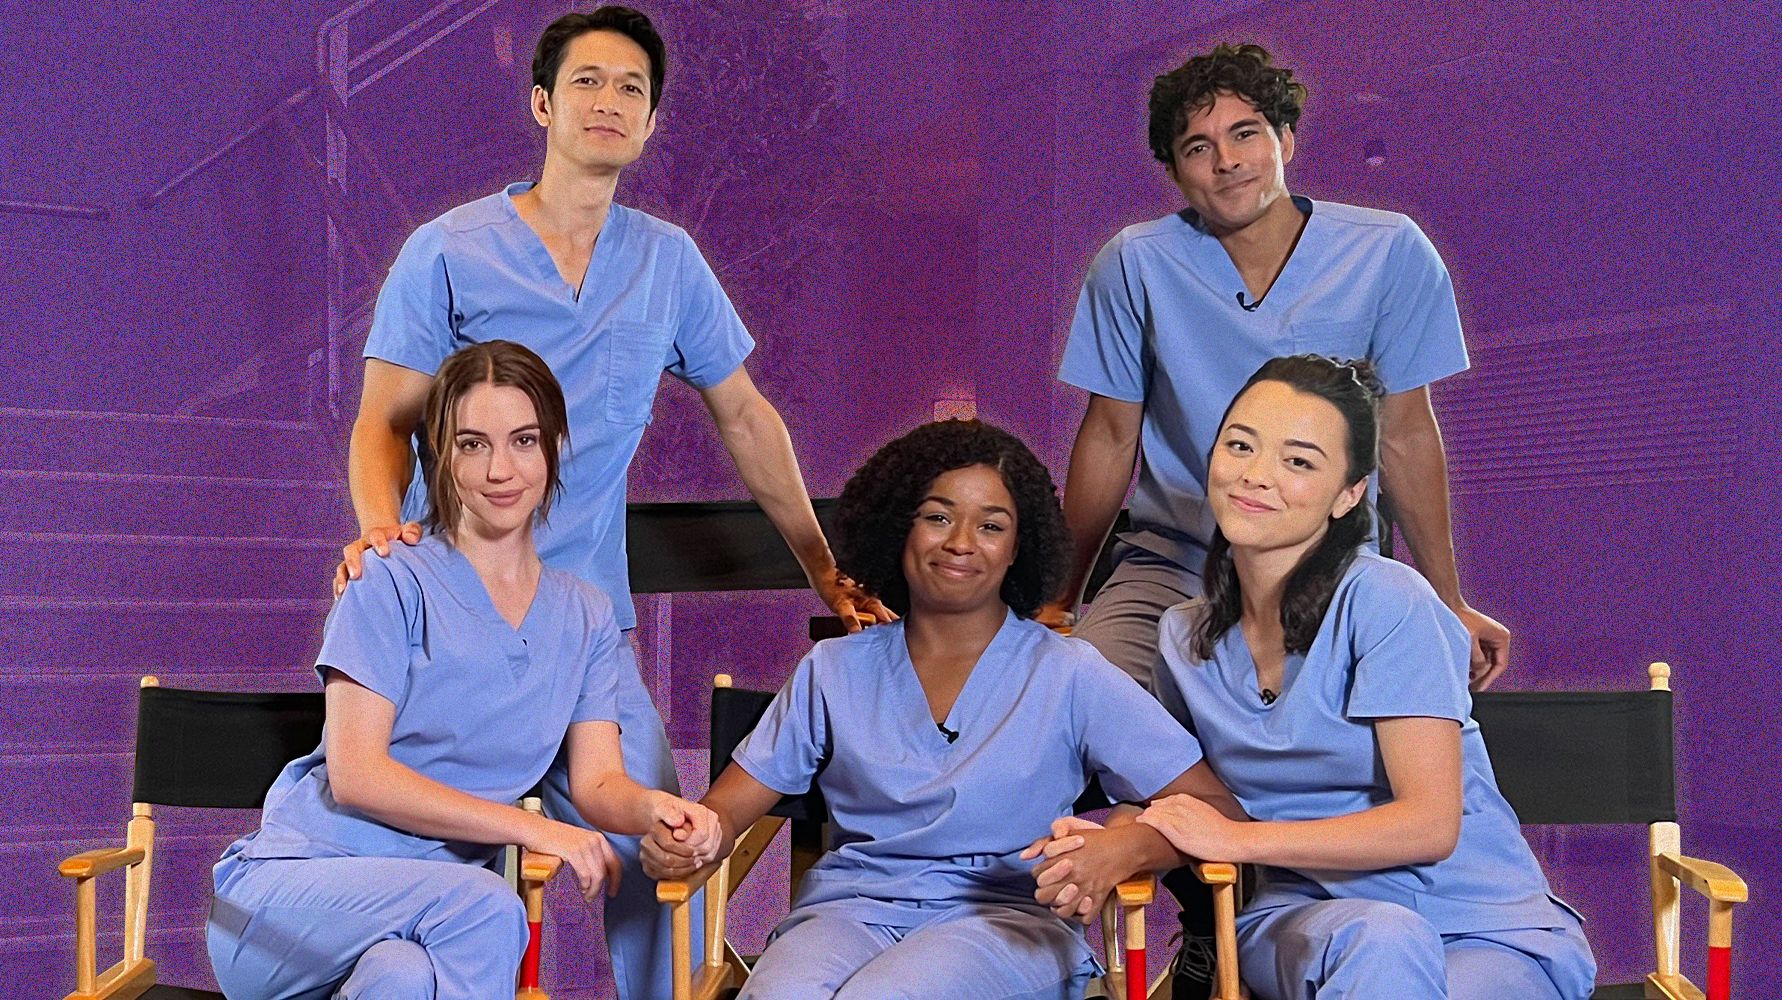 18year Boy Fuck Girl Hard Videos - The 5 New Interns of 'Grey's Anatomy' Reveal All the Details About Their  Debuts in a Behind-the-Scenes Interview